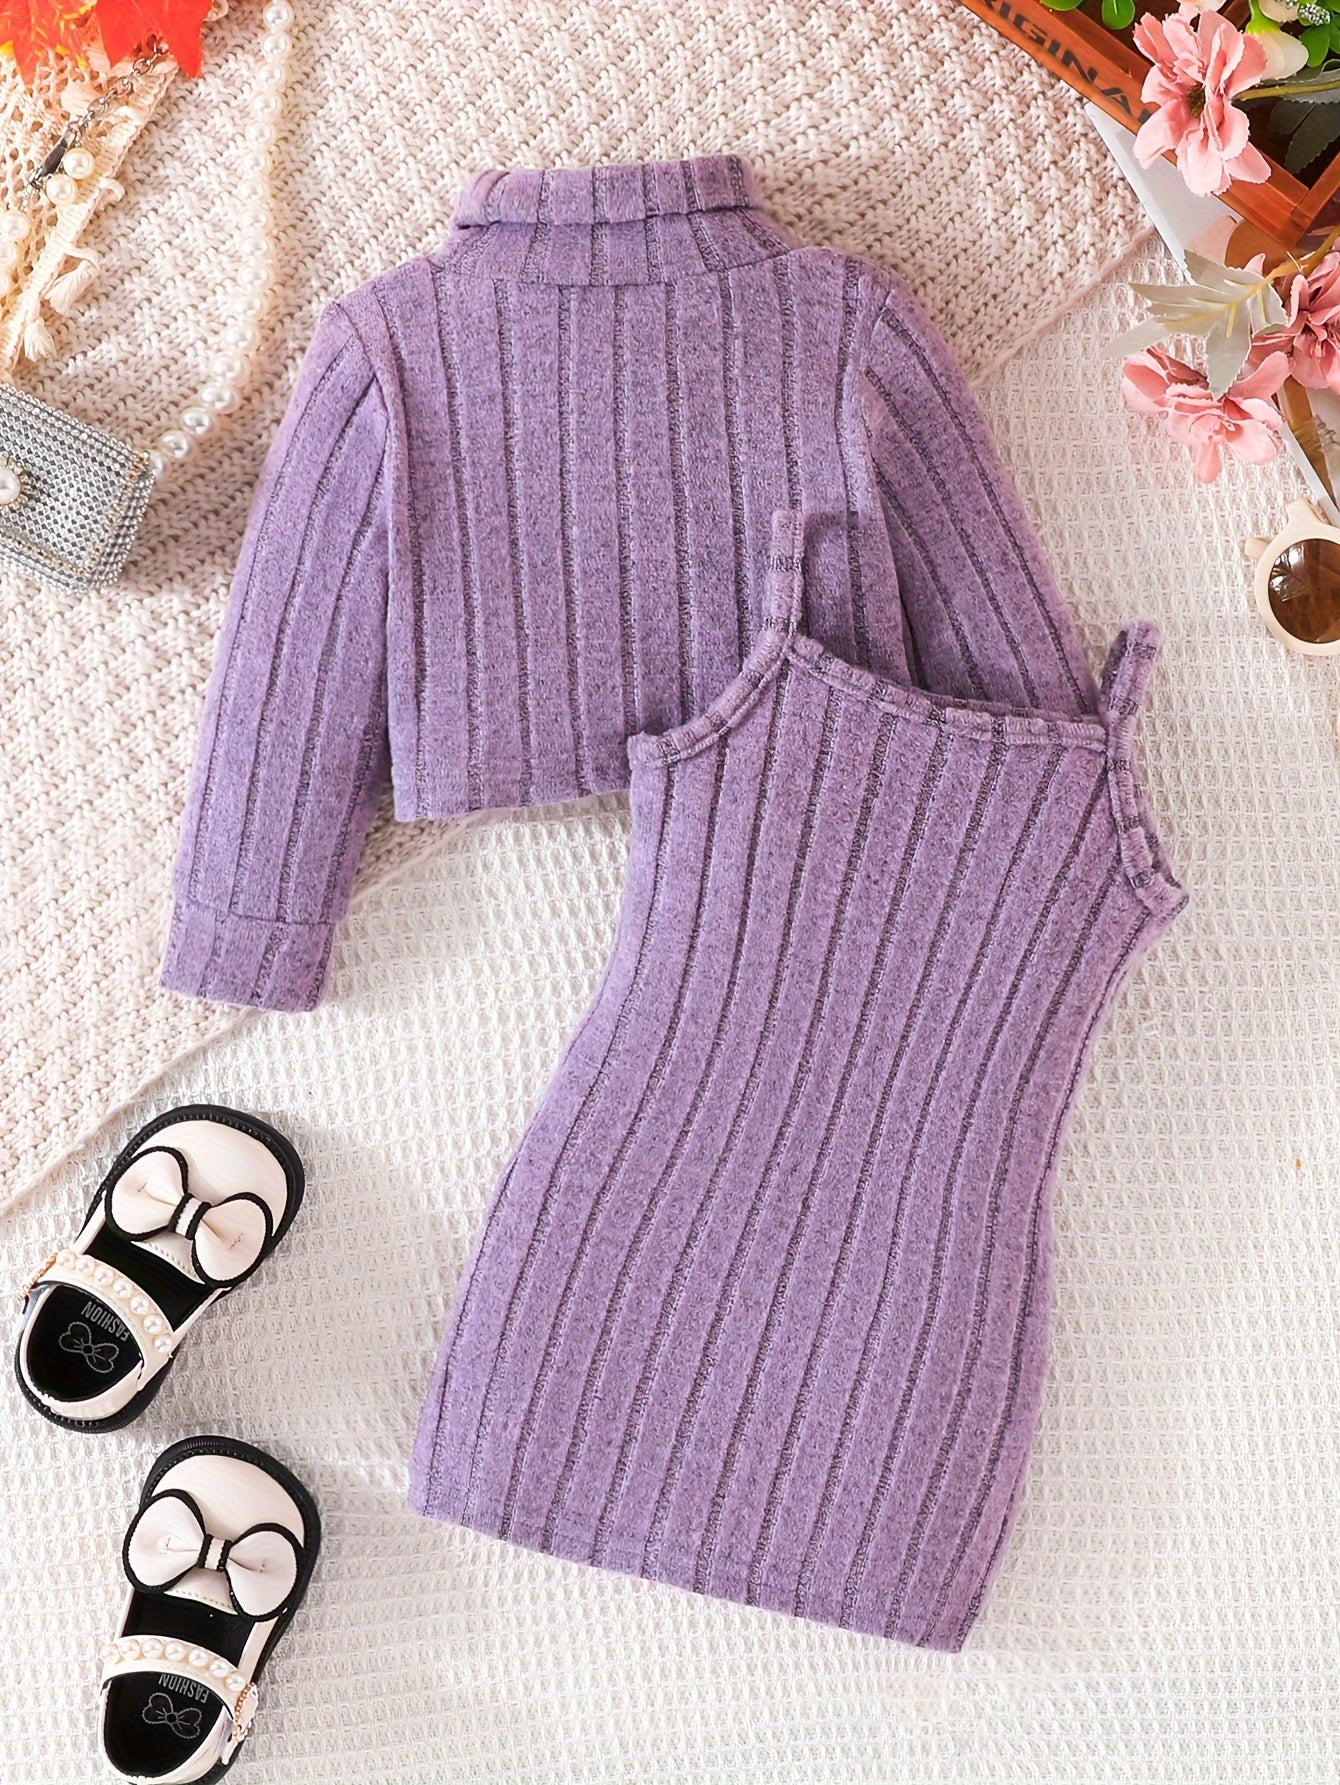 Little Lady New Stylish Outfits - Mock Neck Long-sleeved Pullover Cropped Top & Suspender Skirt Set, Toddler's Clothes Autumn And Winter